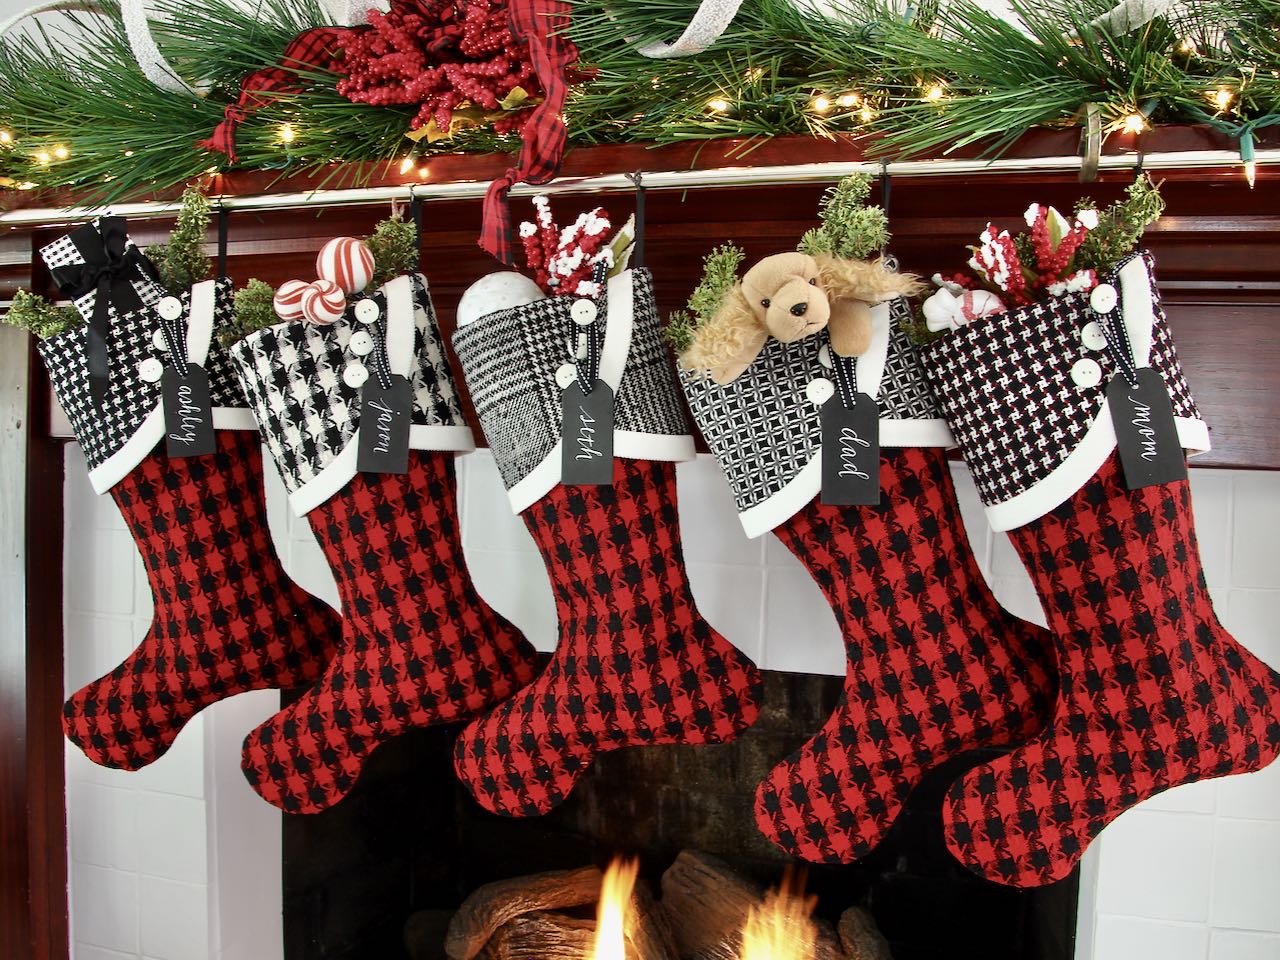 5 coordinating yet unique Christmas stockings are hagning from a mantel above a fire. Black wood name tags hang from the top of three buttons on each cuff